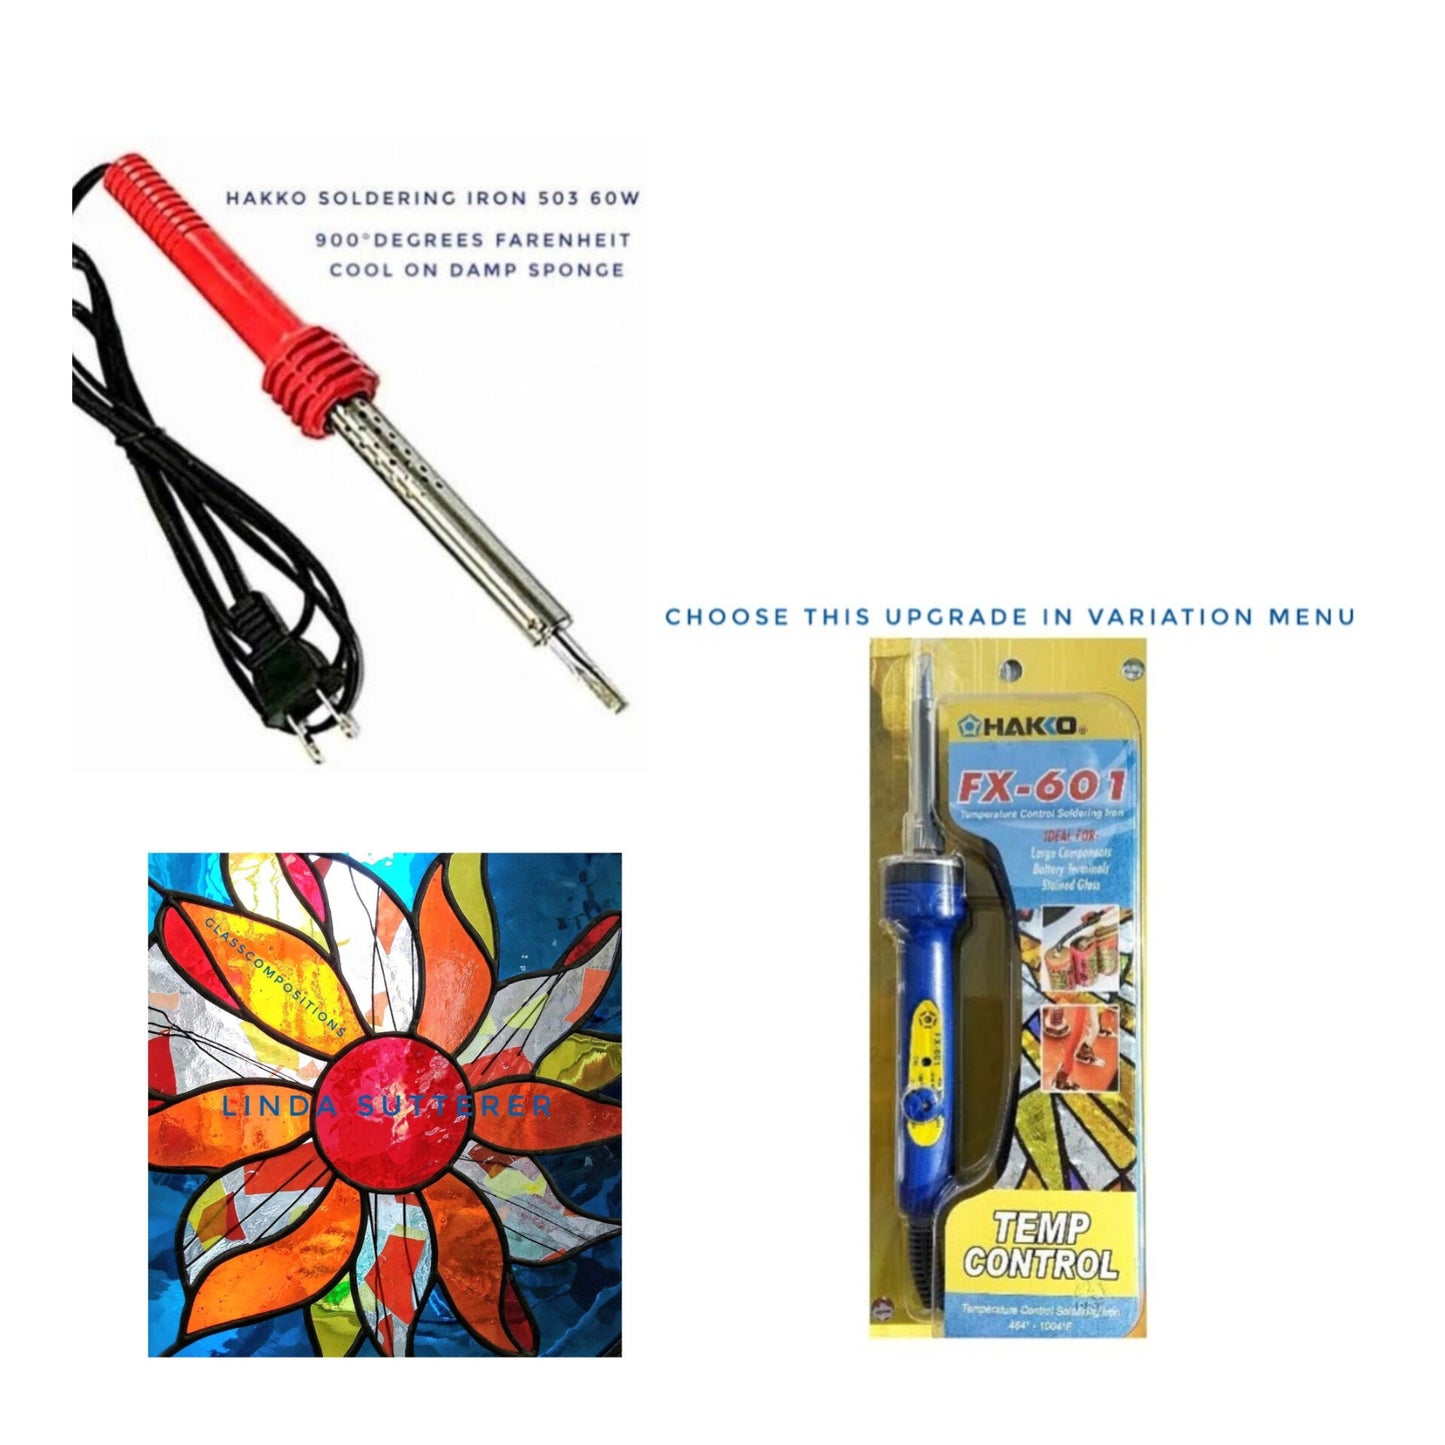 Beginner Stained Glass. Cutting & Soldering Tool Set. Comfortable